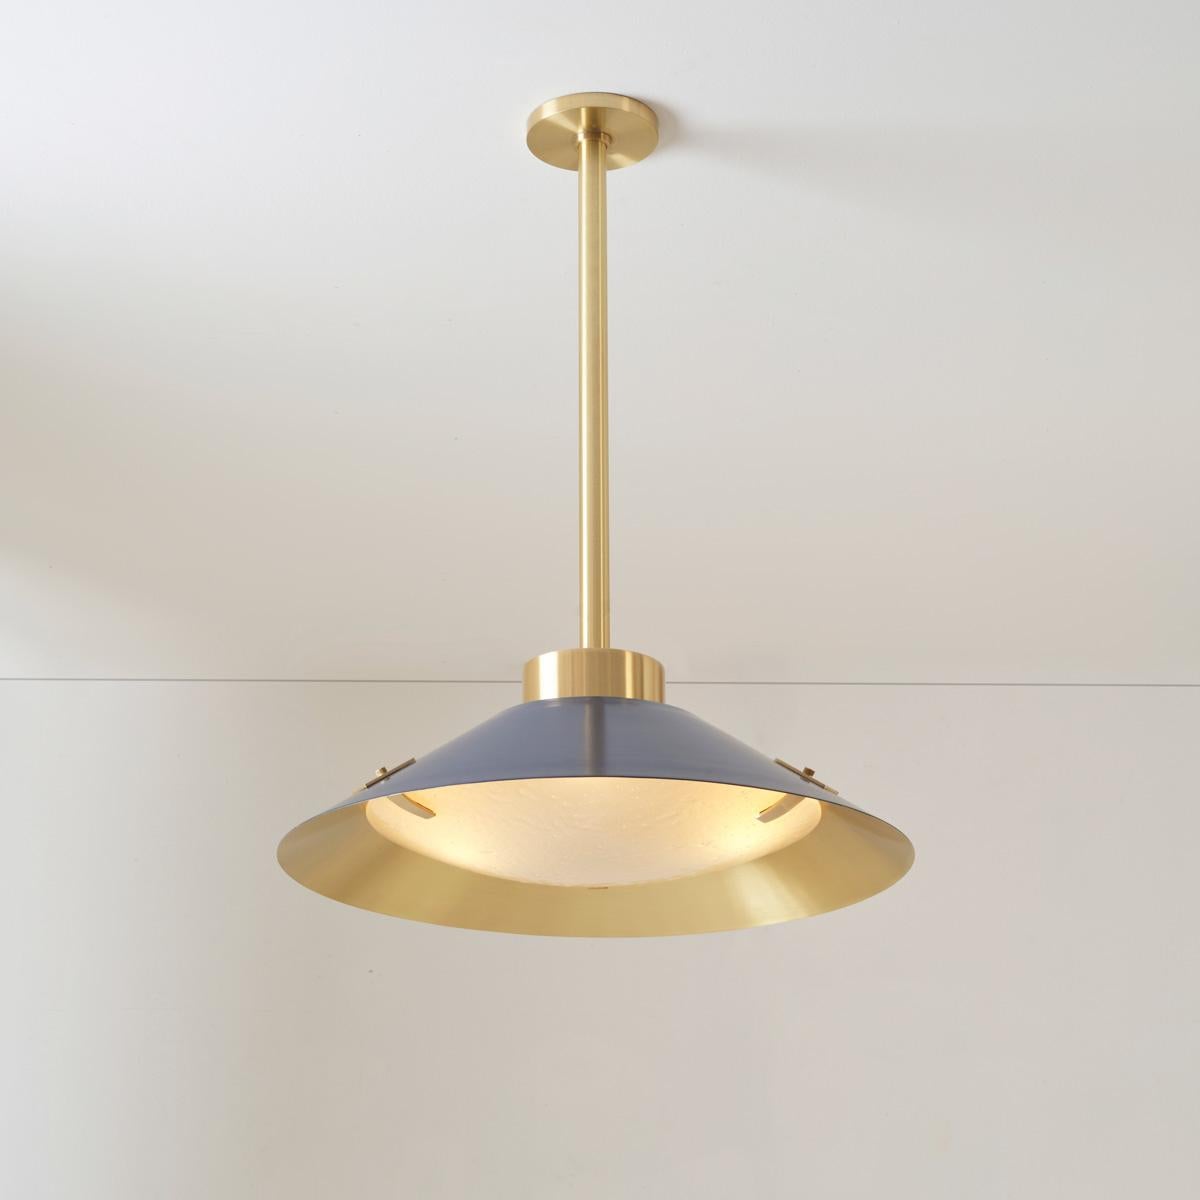 Kono Pendant by Gaspare Asaro. Satin Brass and Sand White For Sale 4